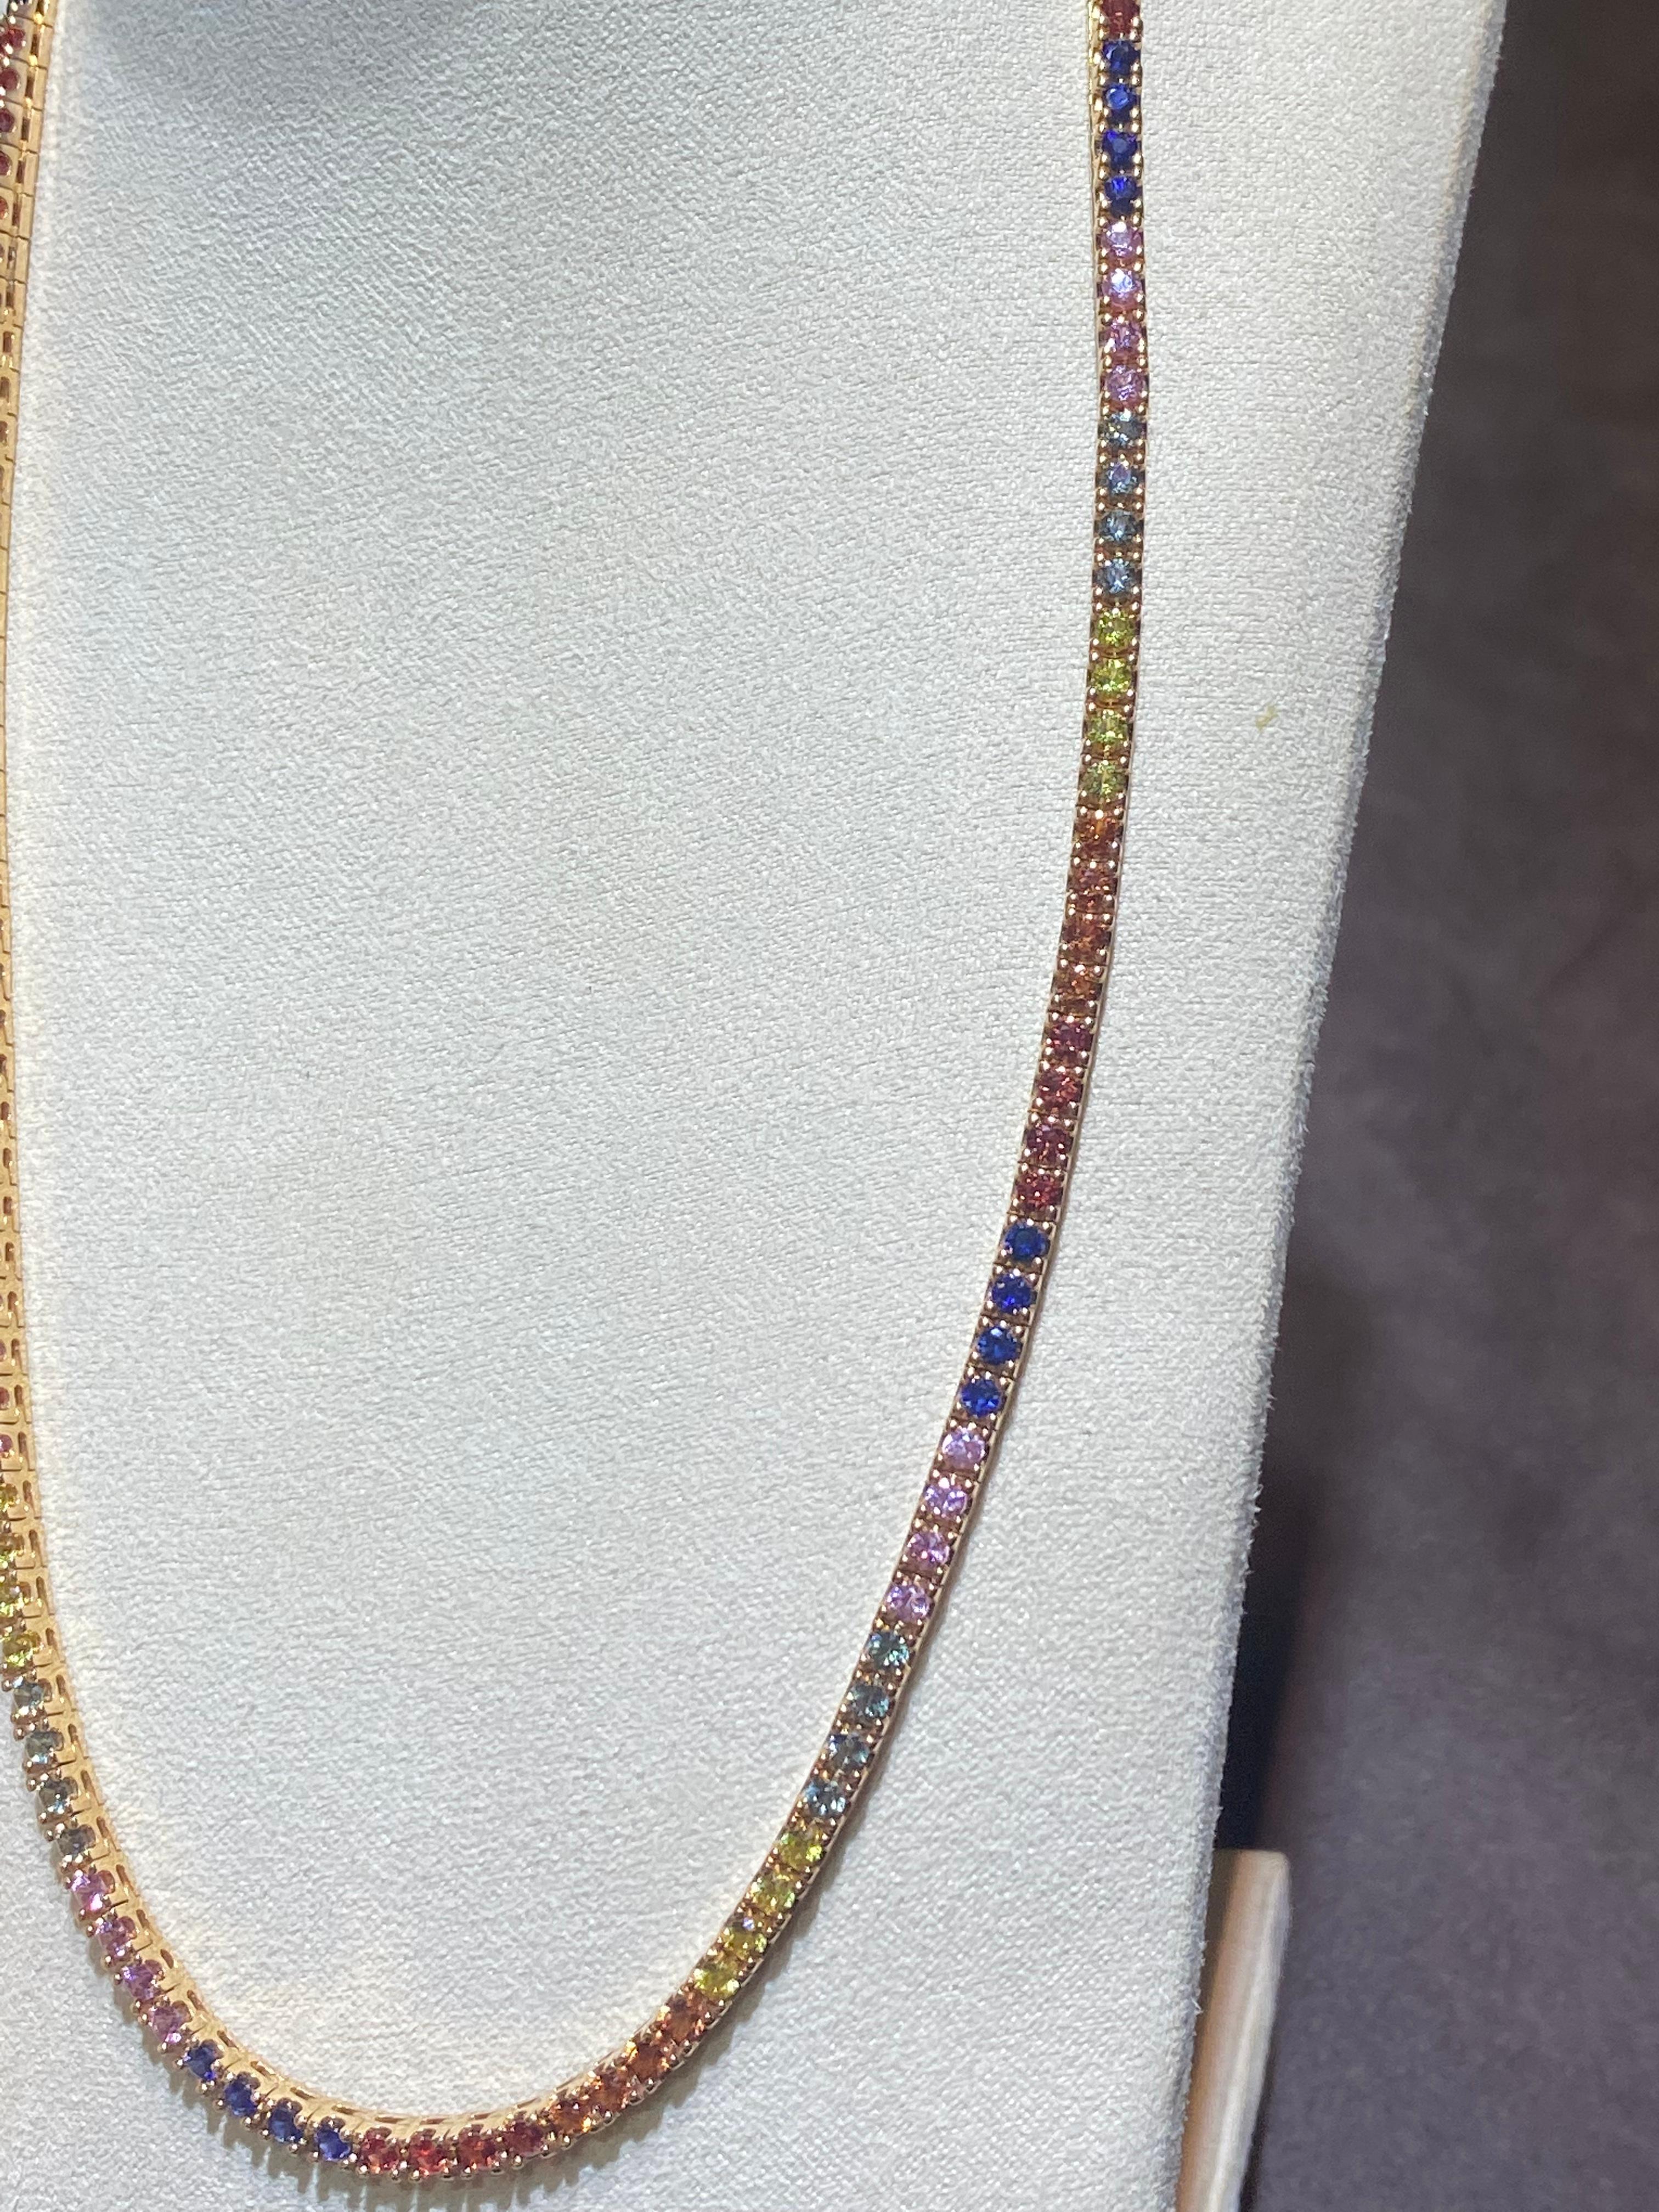 Yellow 18K Gold Necklace

Weight 28,56 grams

Size 43 cm

Blue Sapphire 1,43  ct -25 pieces
Green Sapphire  1,41  ct- 24 pieces
Orange Sapphire  1,44 ct -24  pieces
Pink 1,43 Sapphire  1, 43ct - 24 pieces
Red Sapphire  1,43 ct - 24  pieces
Yellow